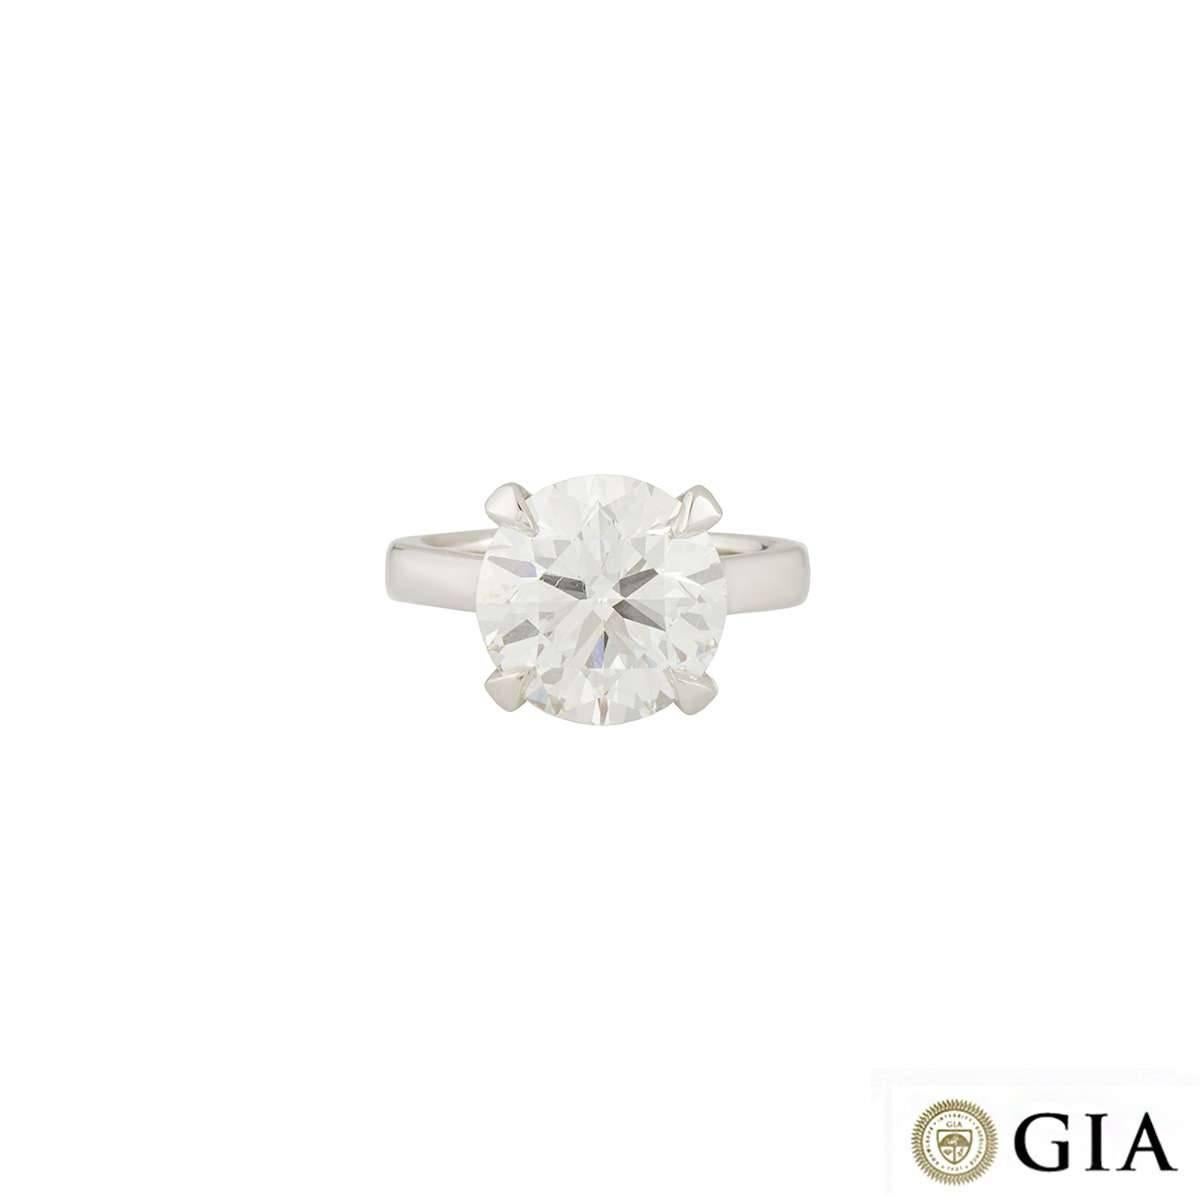 GIA Certified 5.46 Carat Round Brilliant Cut Diamond Engagement Ring For Sale 2